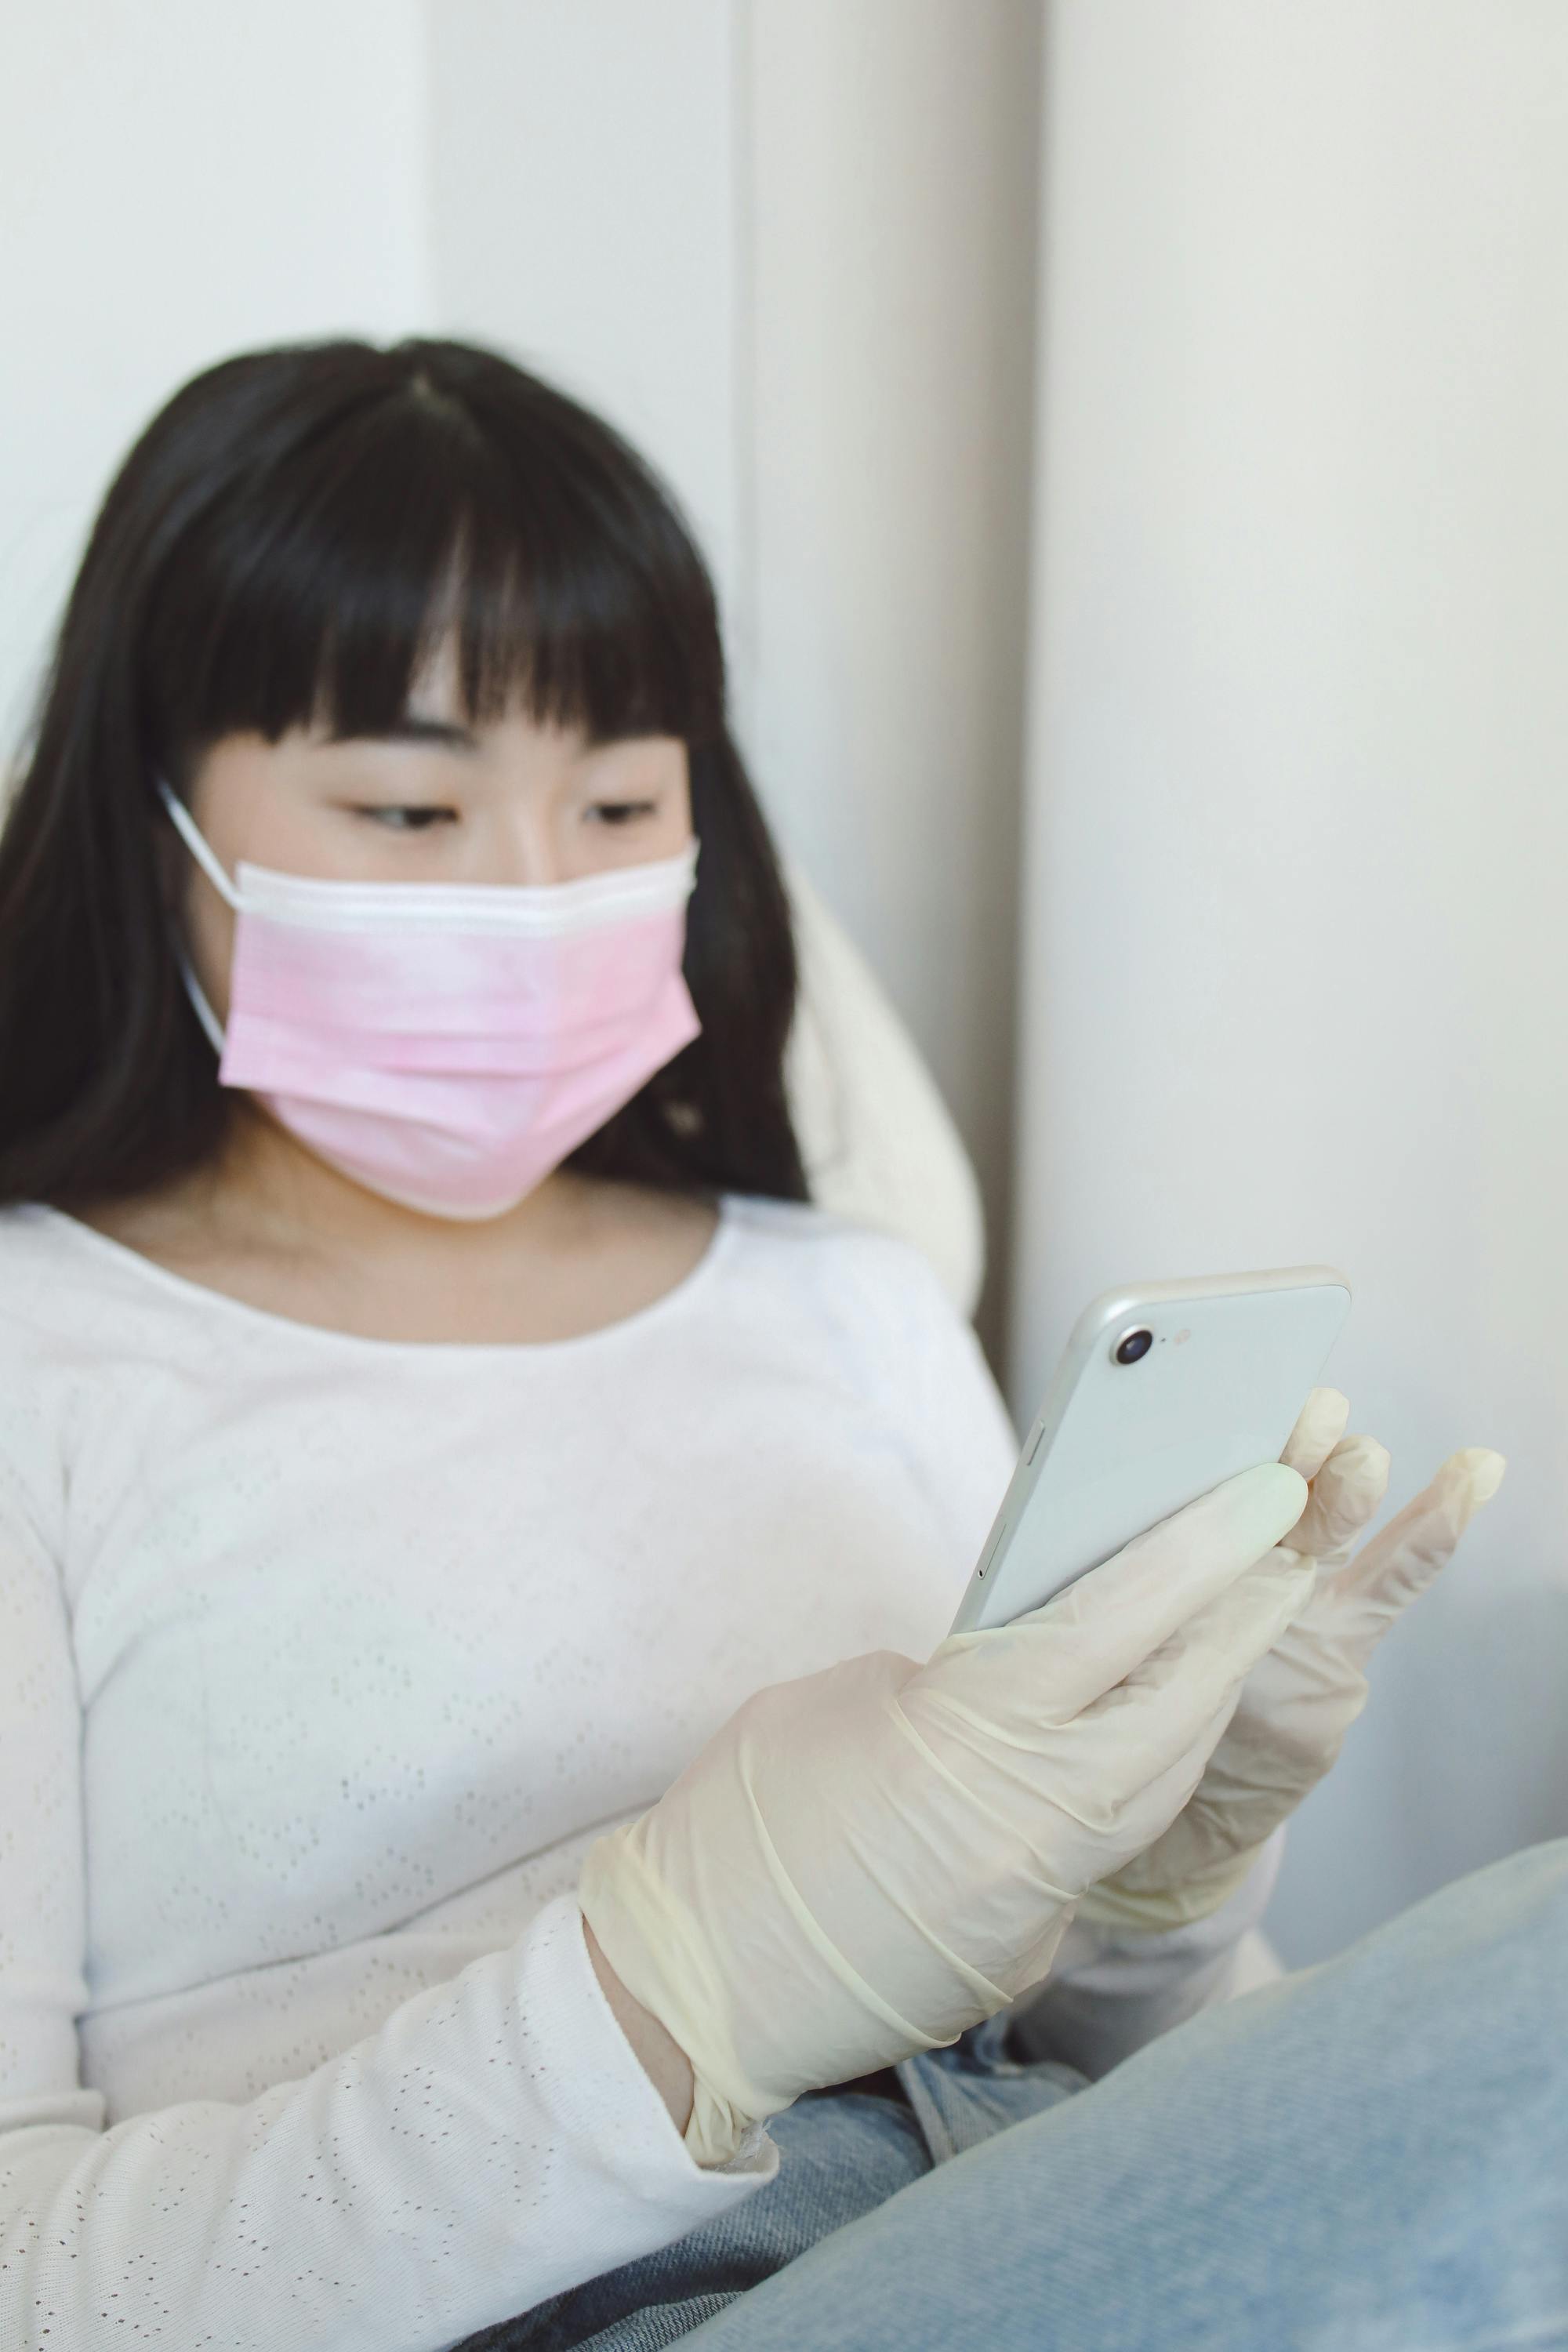 A Woman Using A Smartphone Wears A Medical Face Mask To Avoid The